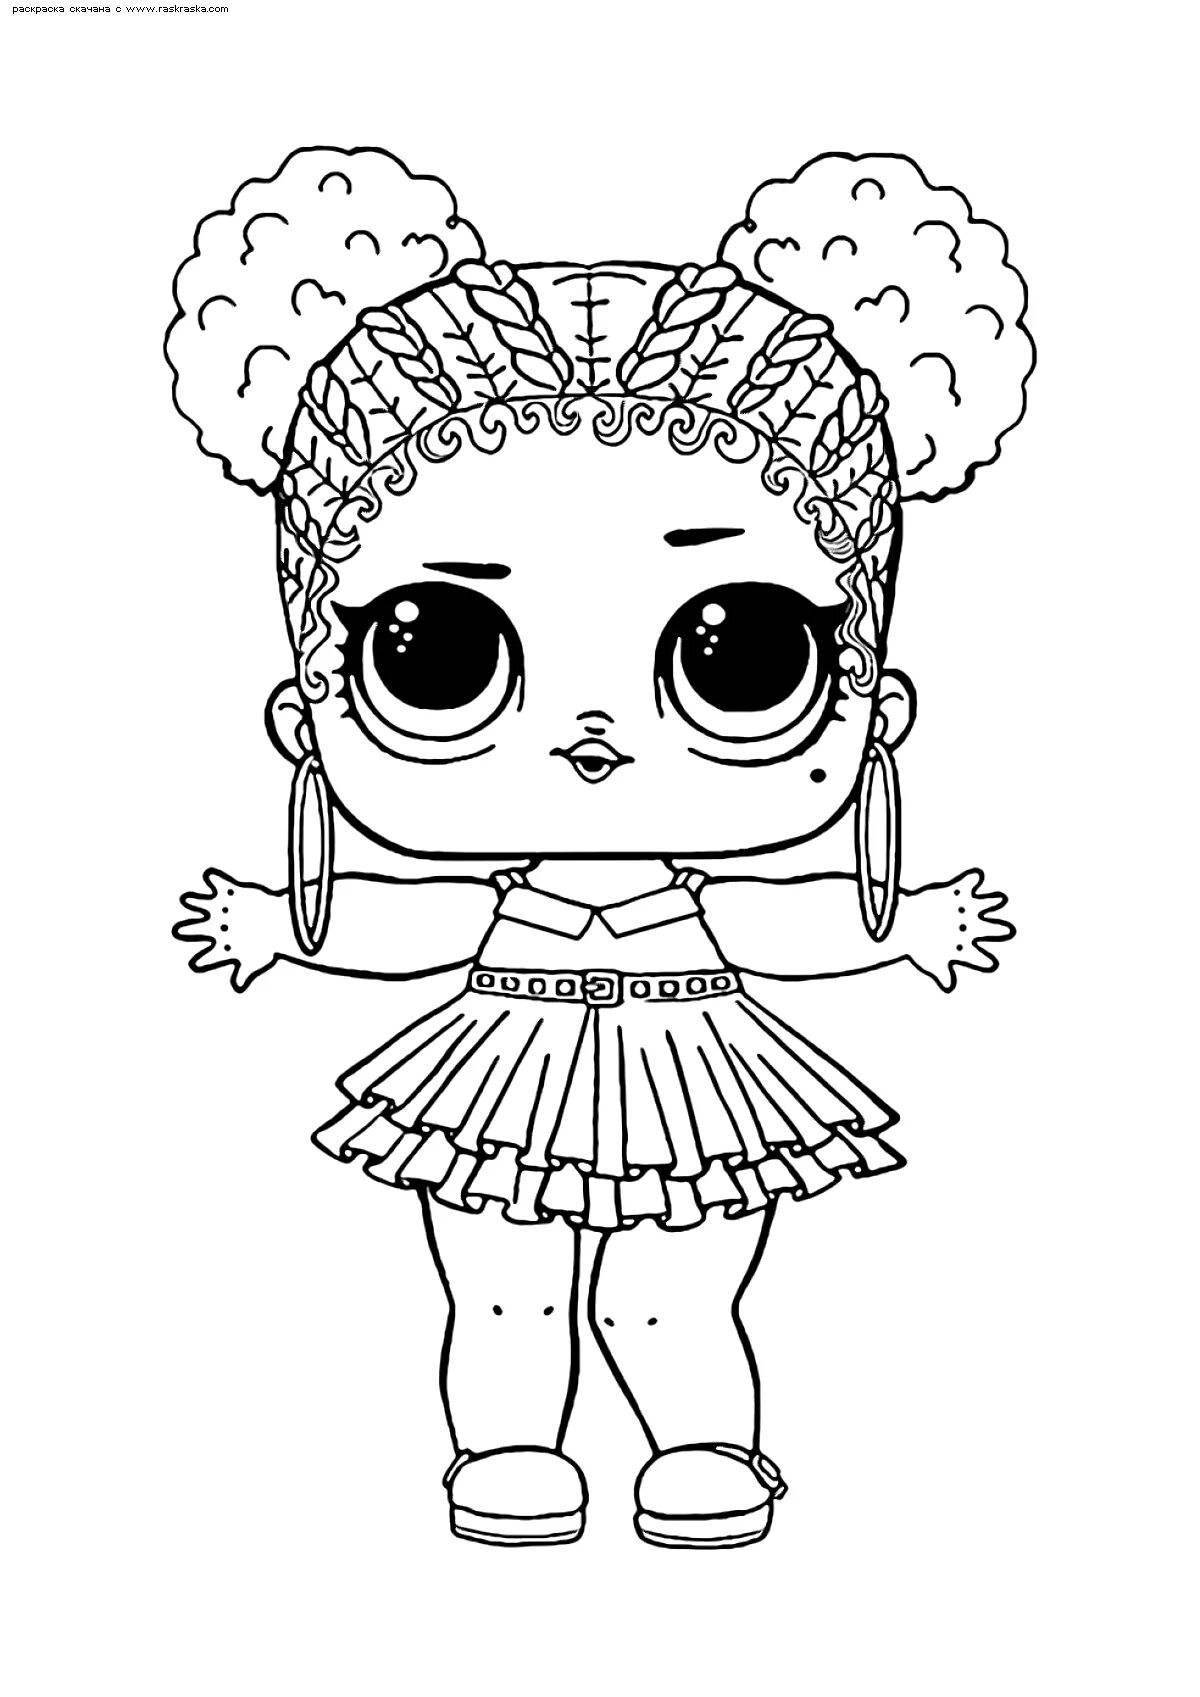 Adorable Lola doll coloring book for 3-4 year olds